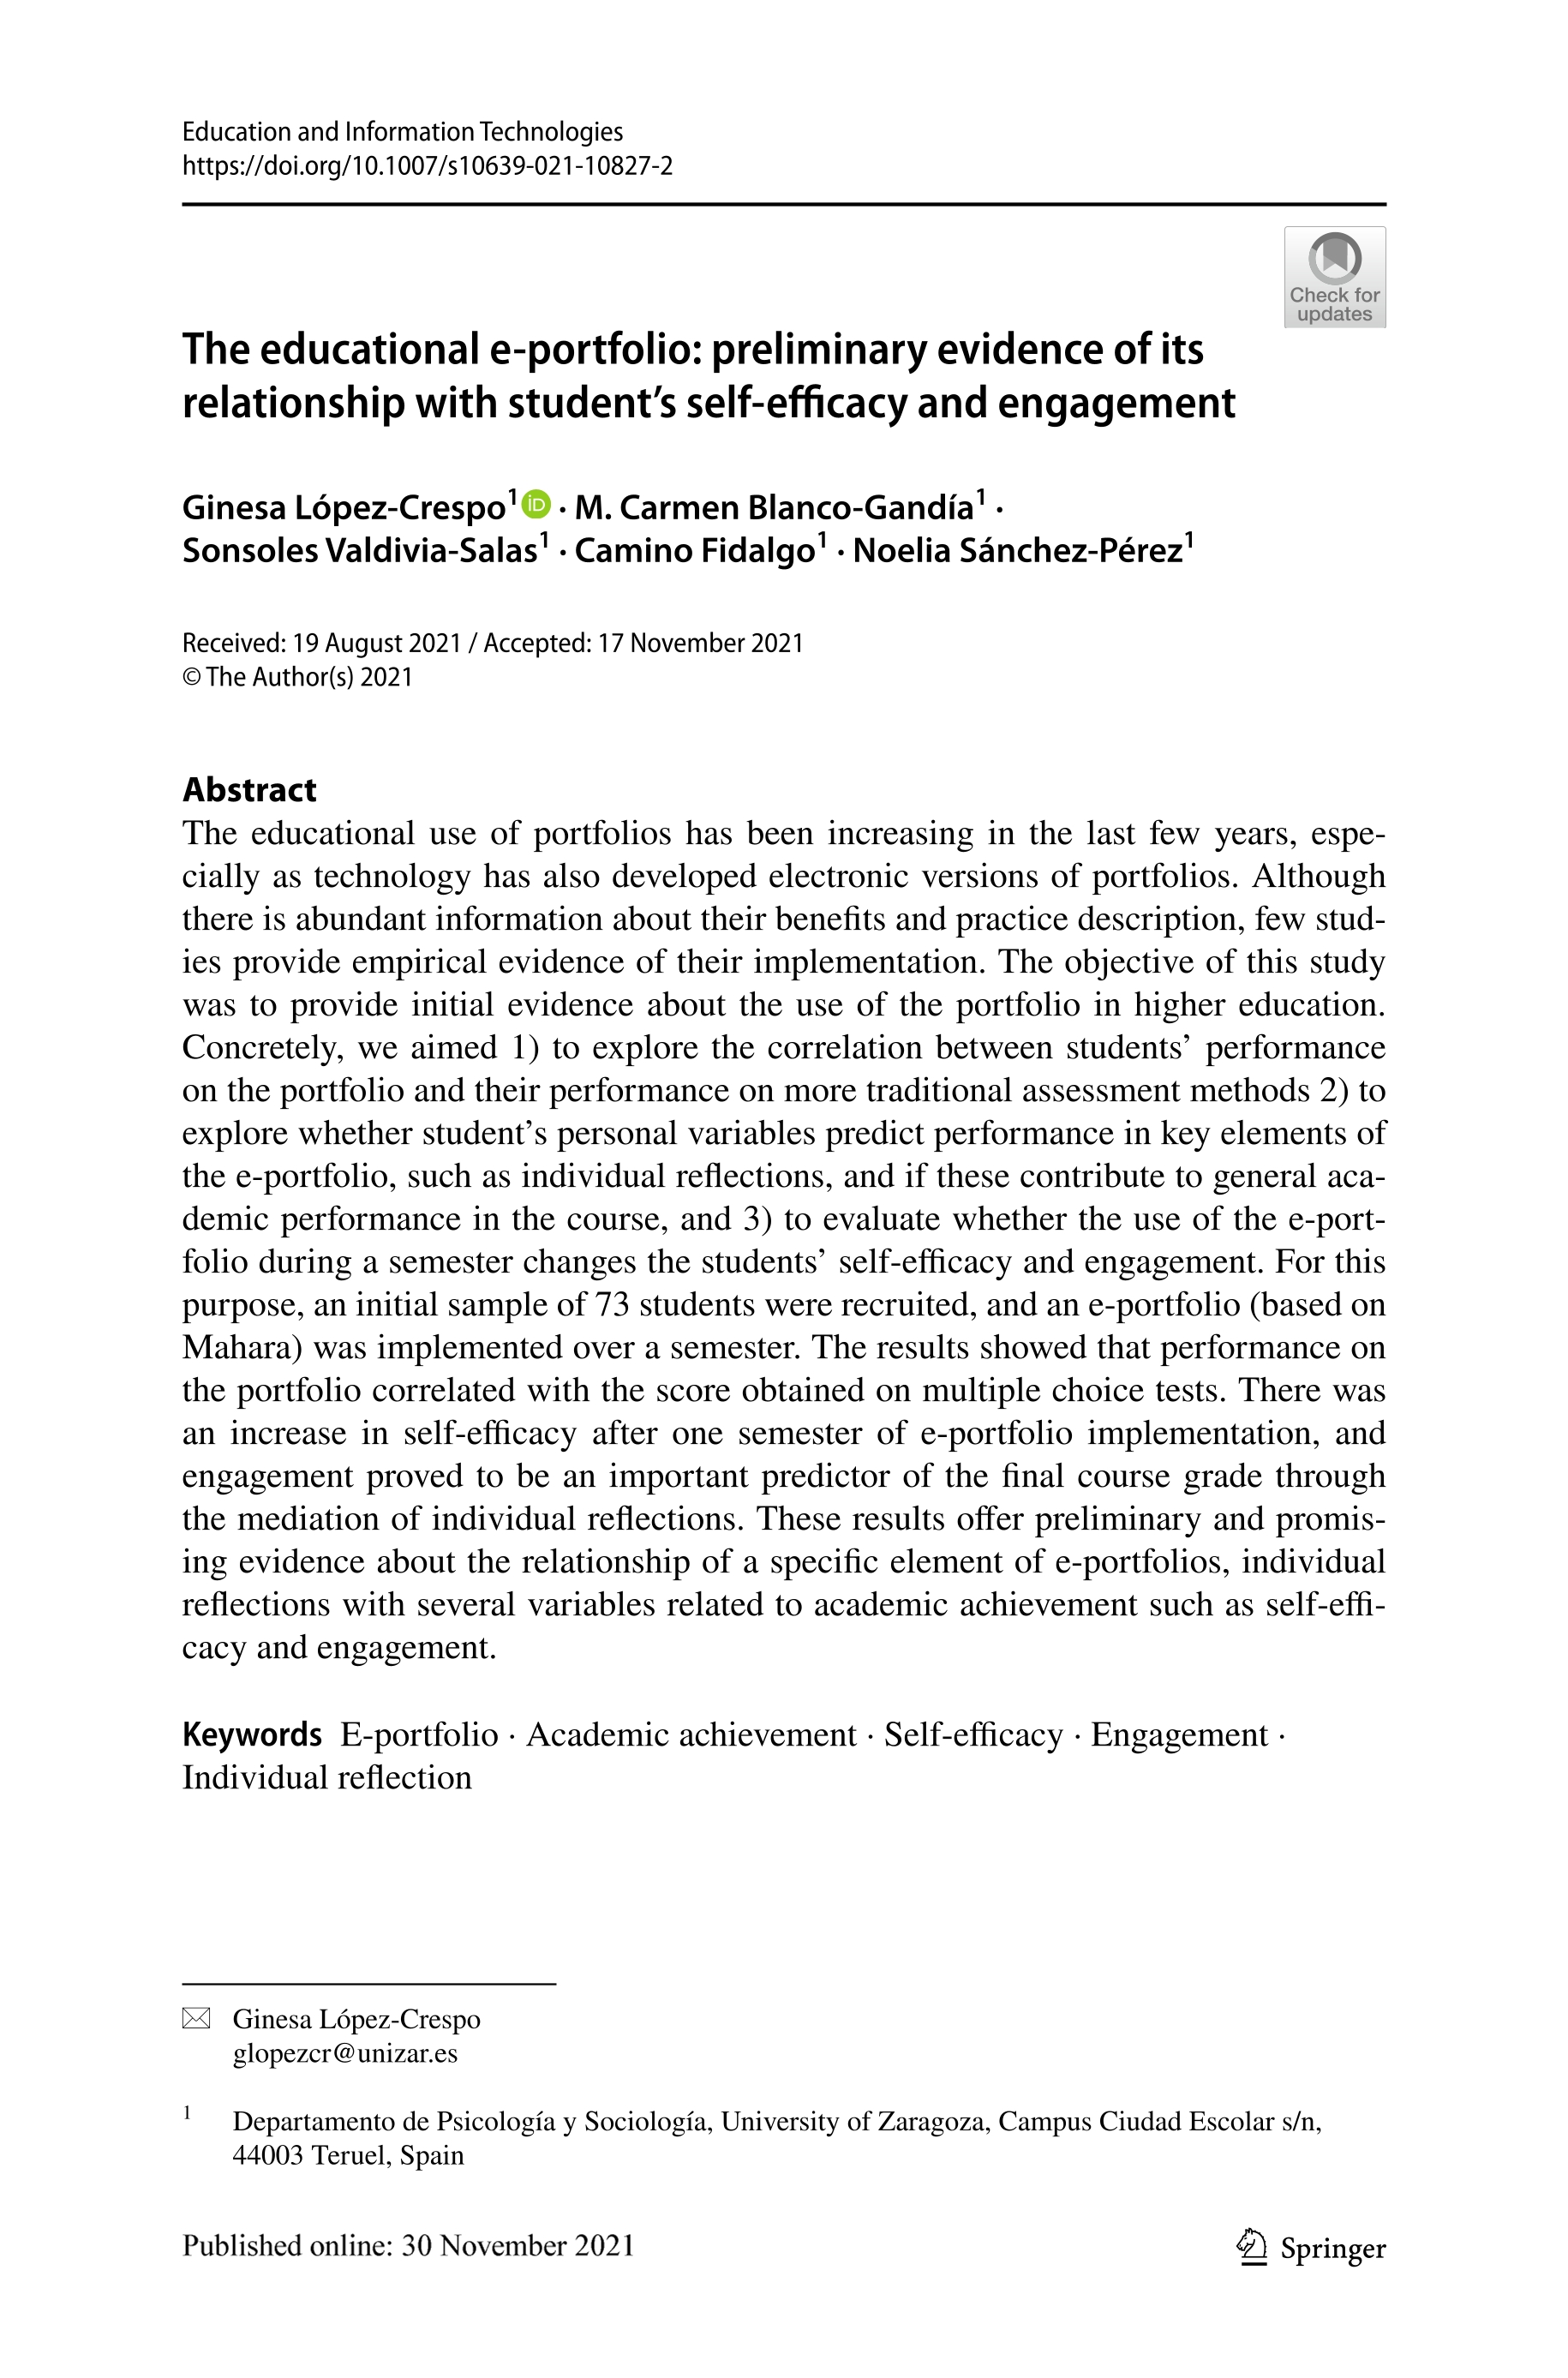 The educational e-portfolio: preliminary evidence of its relationship with student\u2019s self-efficacy and engagement